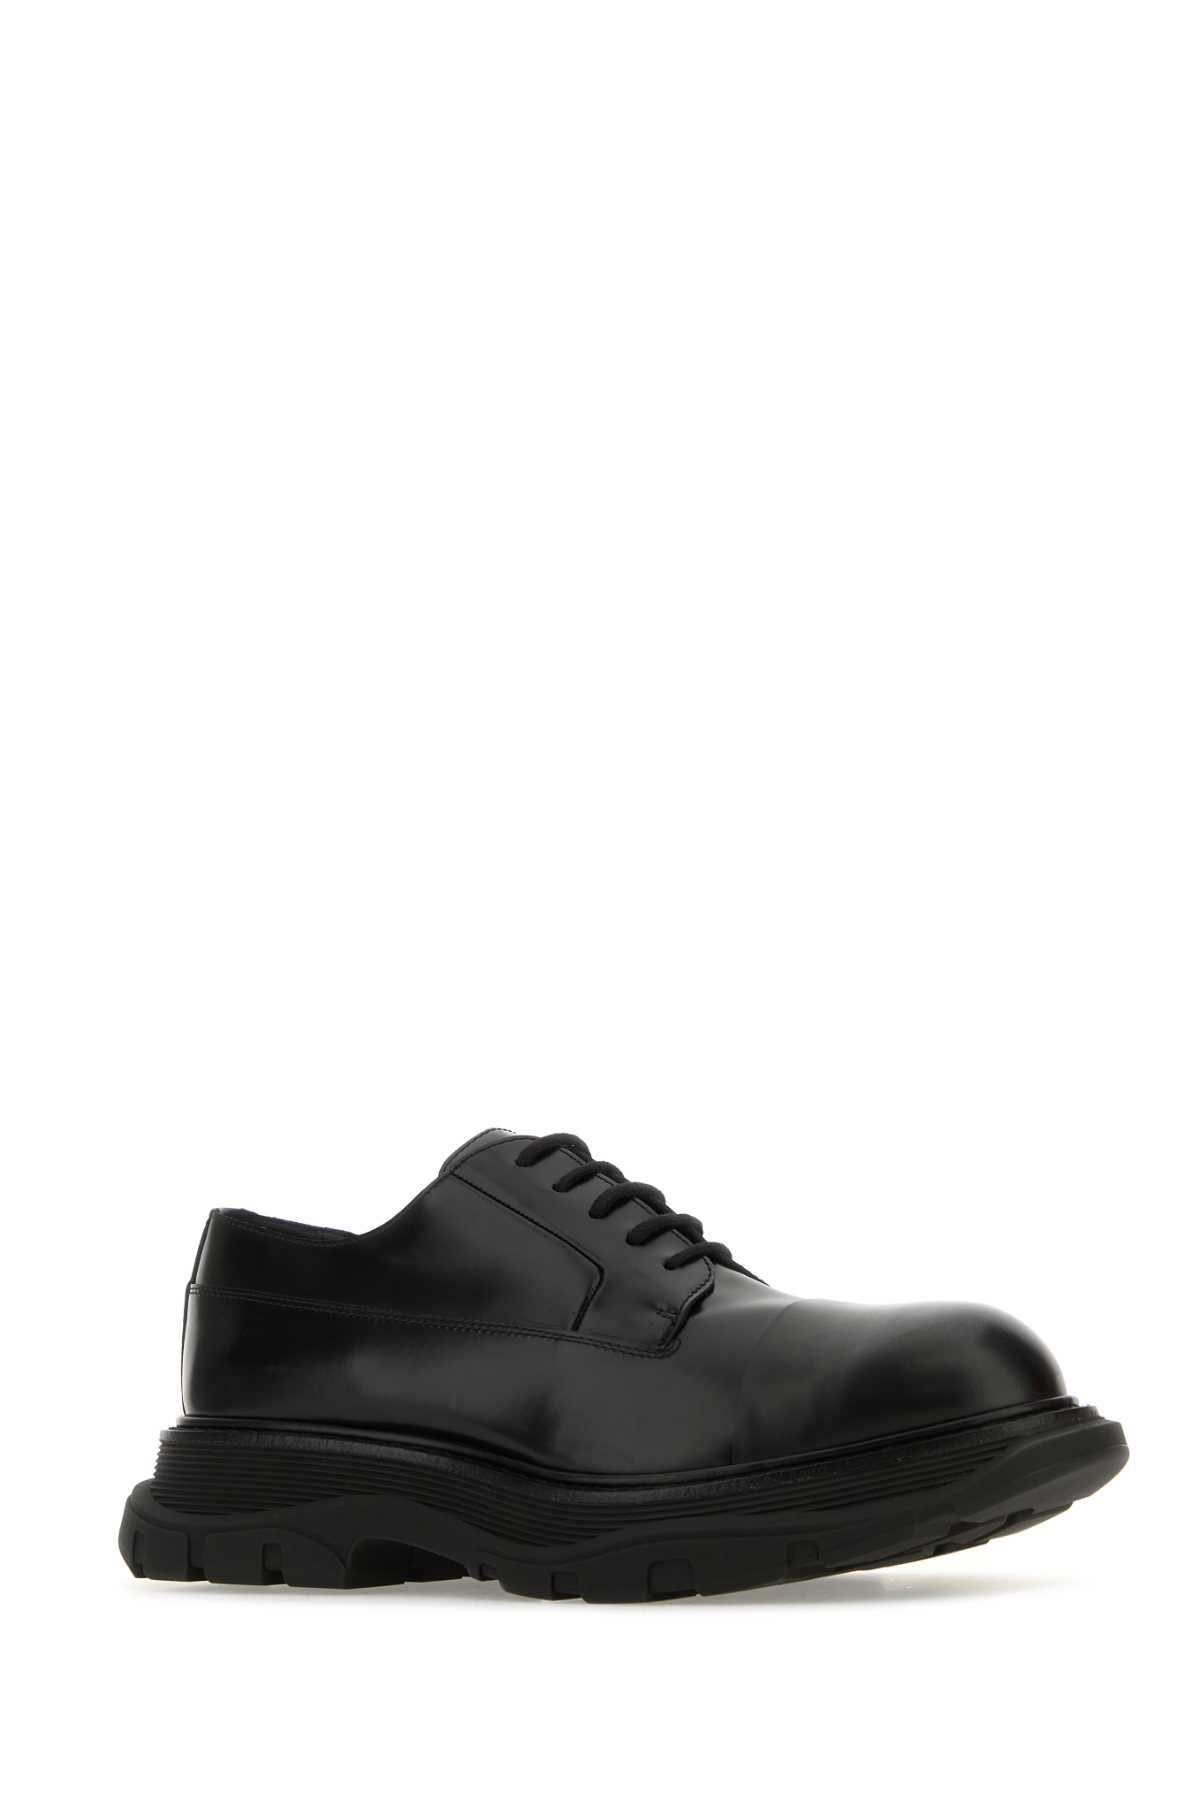 Alexander McQueen Tread leather lace up shoes - Black